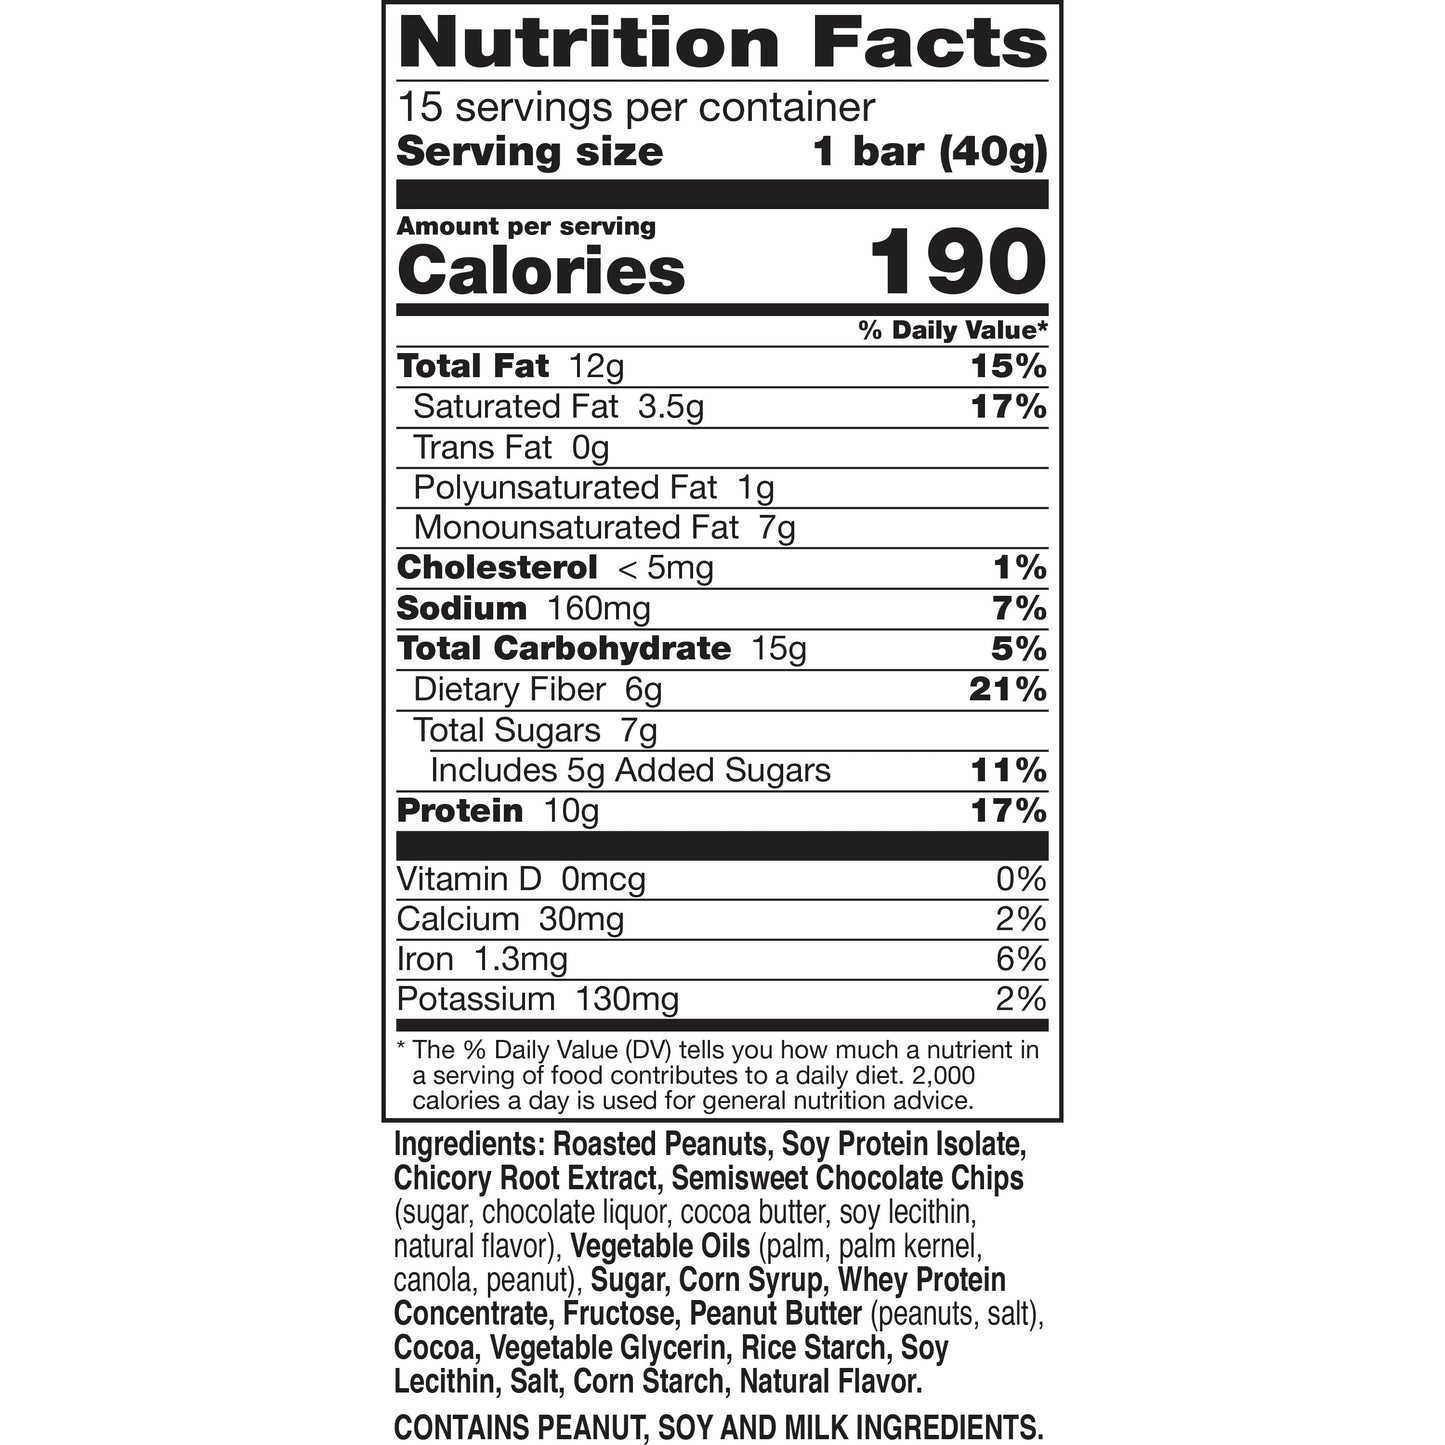 Nature Valley Chewy Granola Bars, Protein, Peanut Butter Dark Chocolate, 15 bars, 21.3 OZ